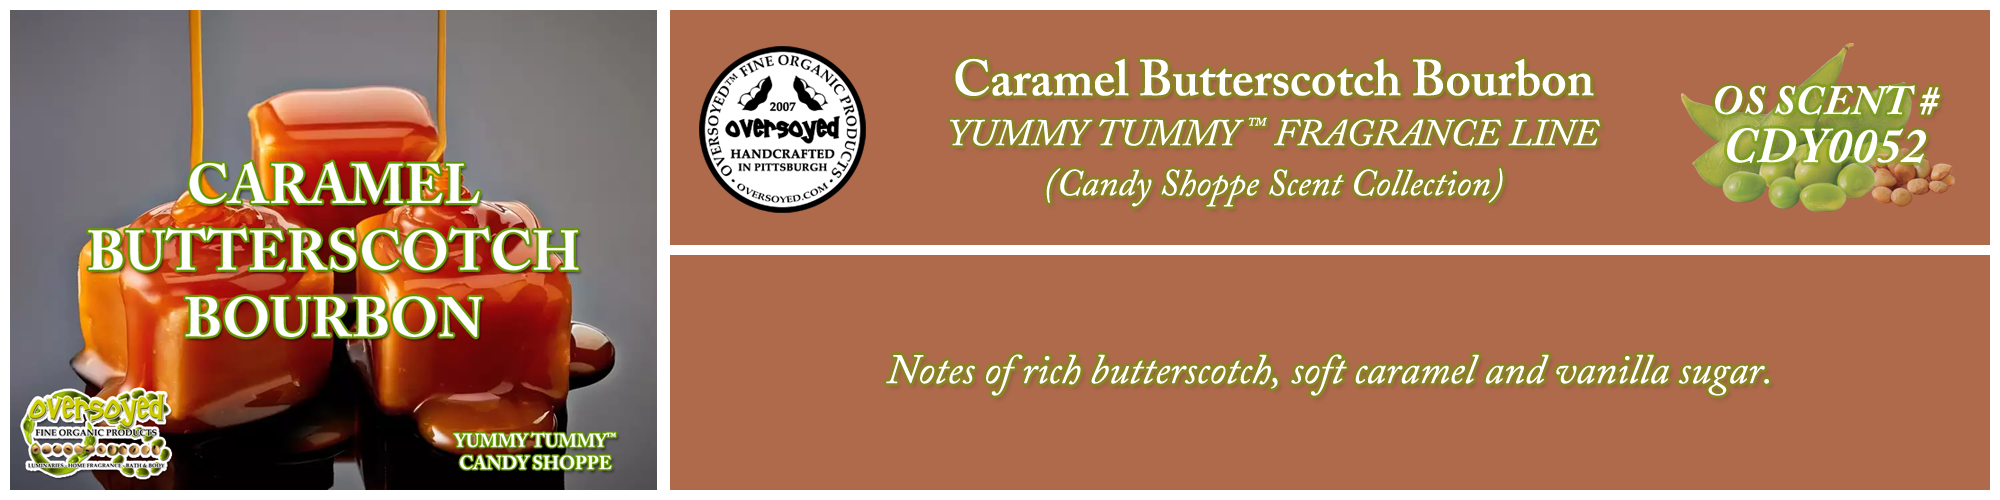 Caramel Butterscotch Bourbon Handcrafted Products Collection